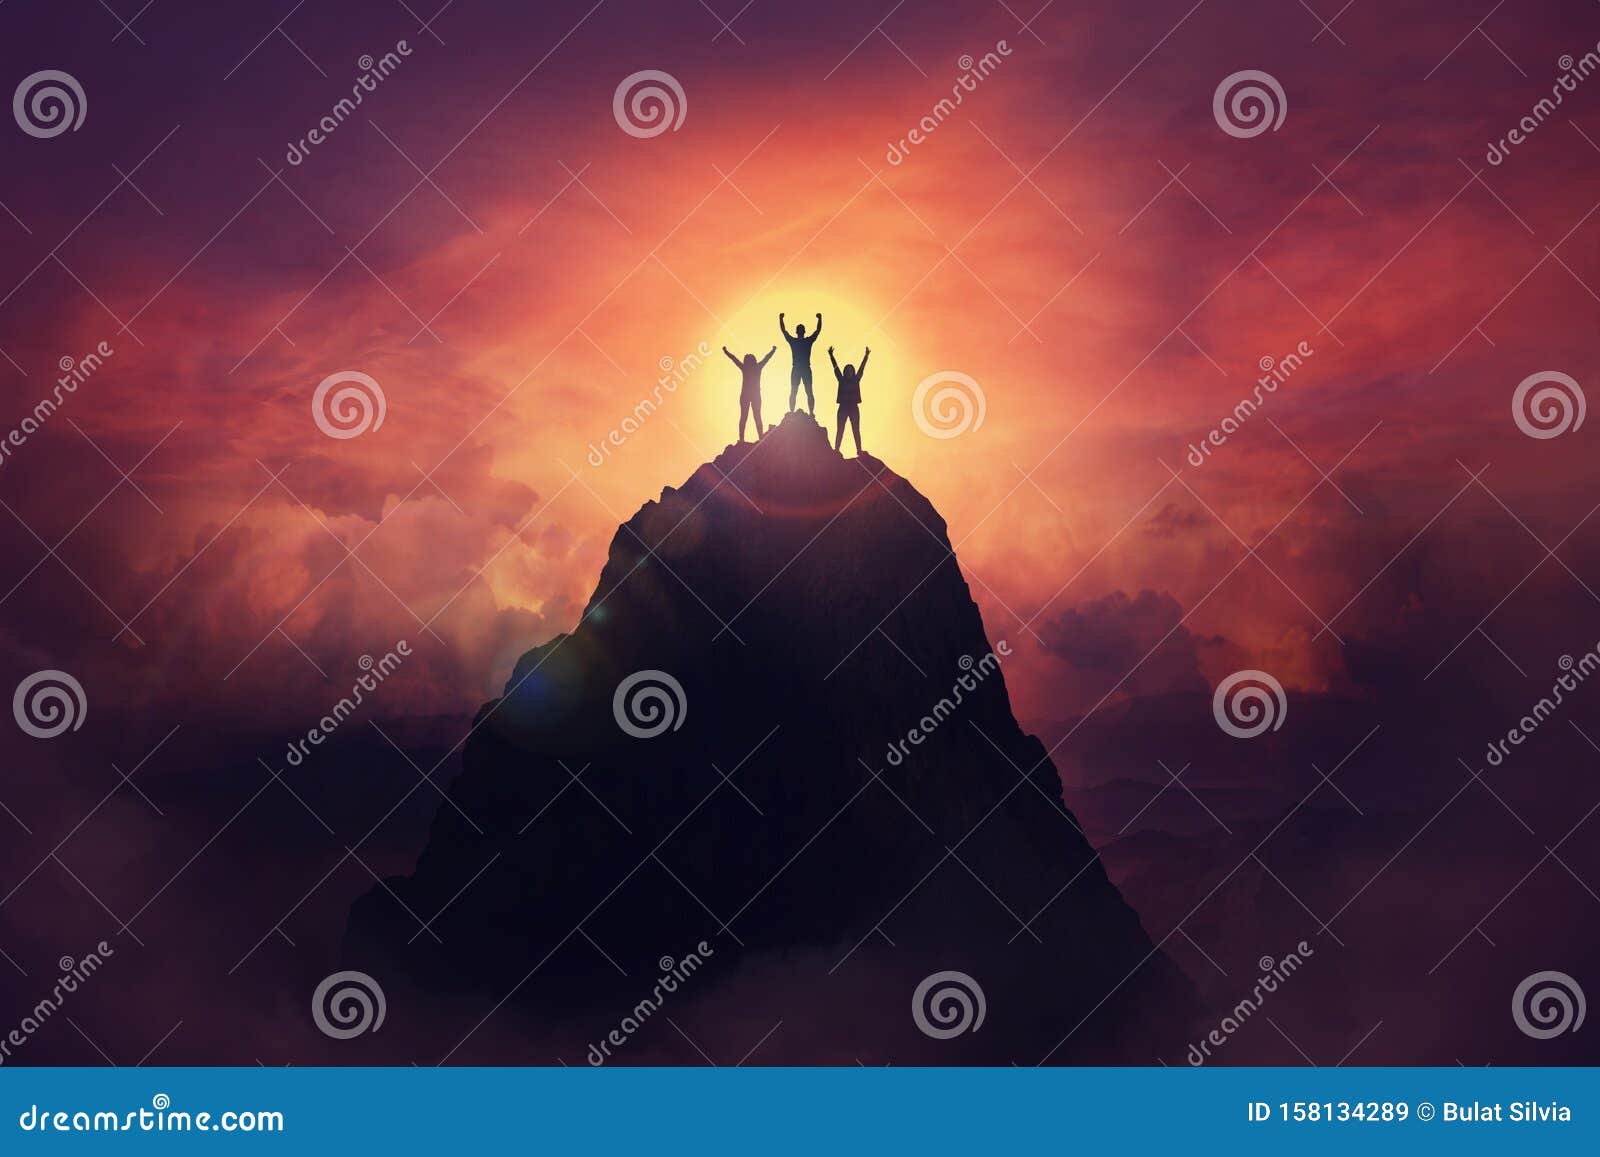 together overcoming obstacles as a group of three people raising hands up on the top of a mountain. celebrate victory and success